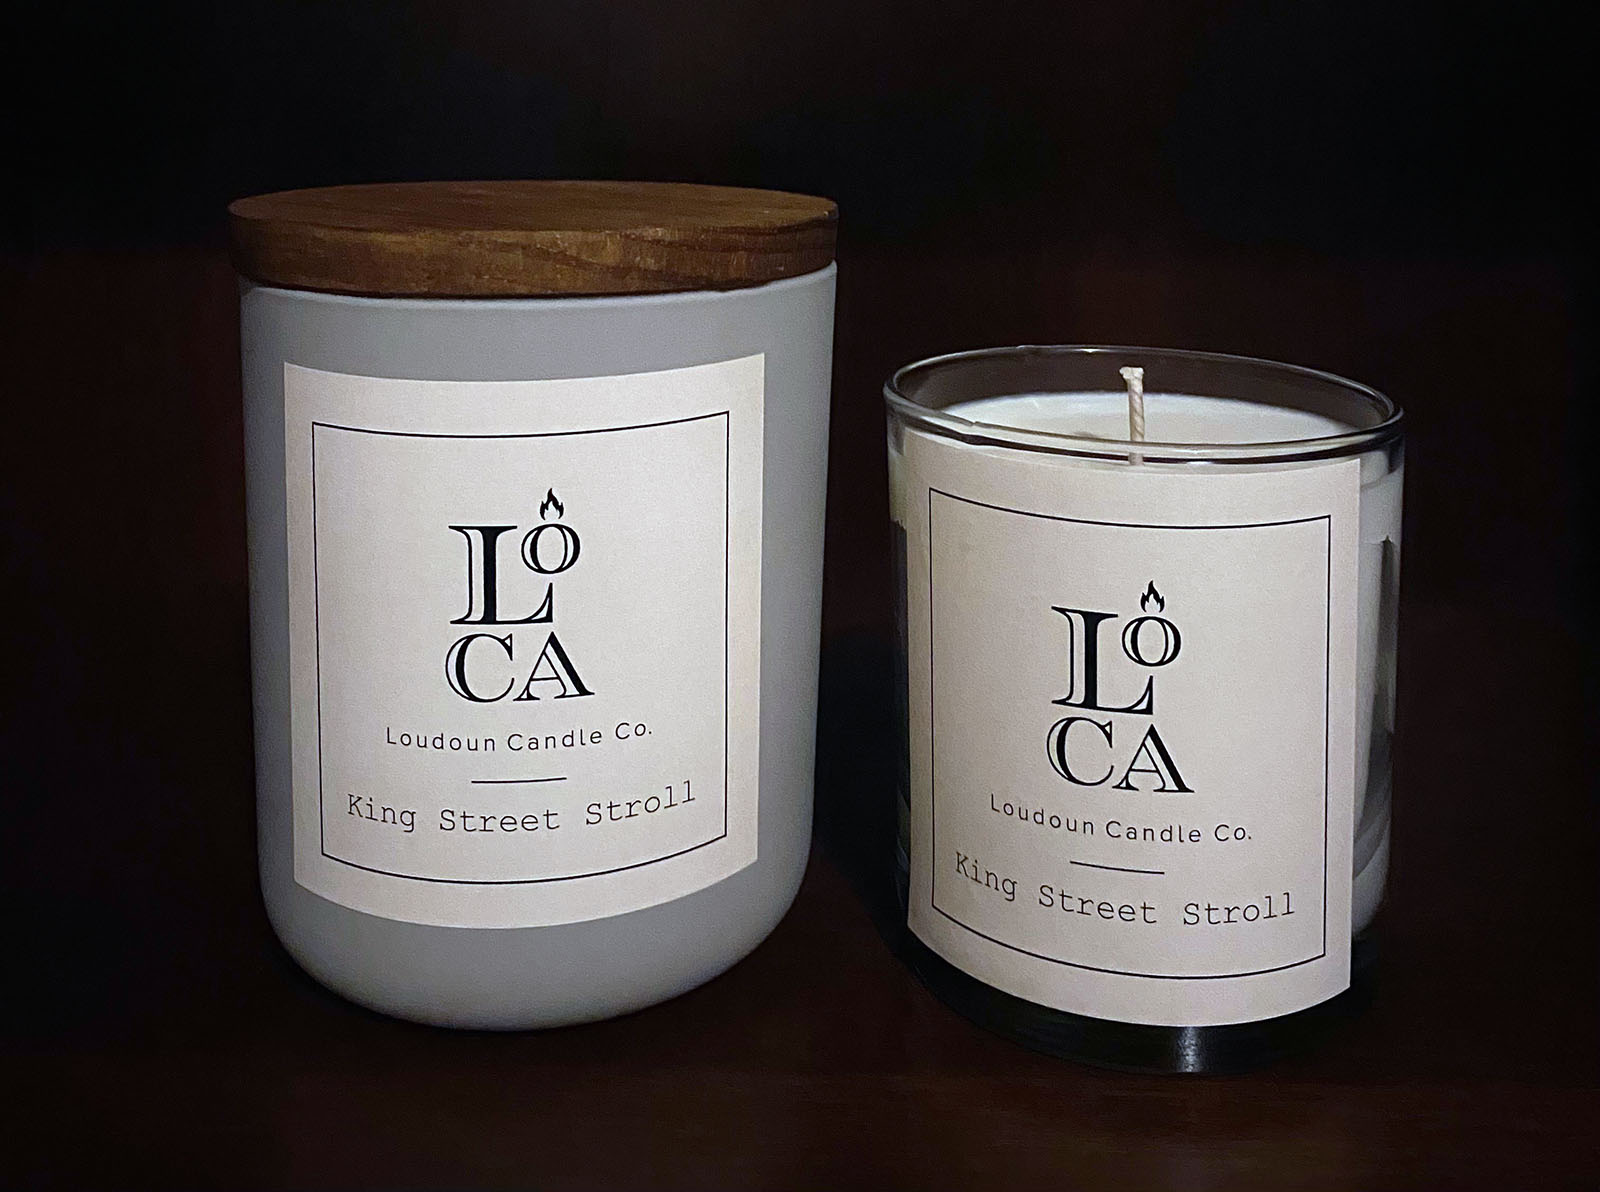 King Street Stroll Candle